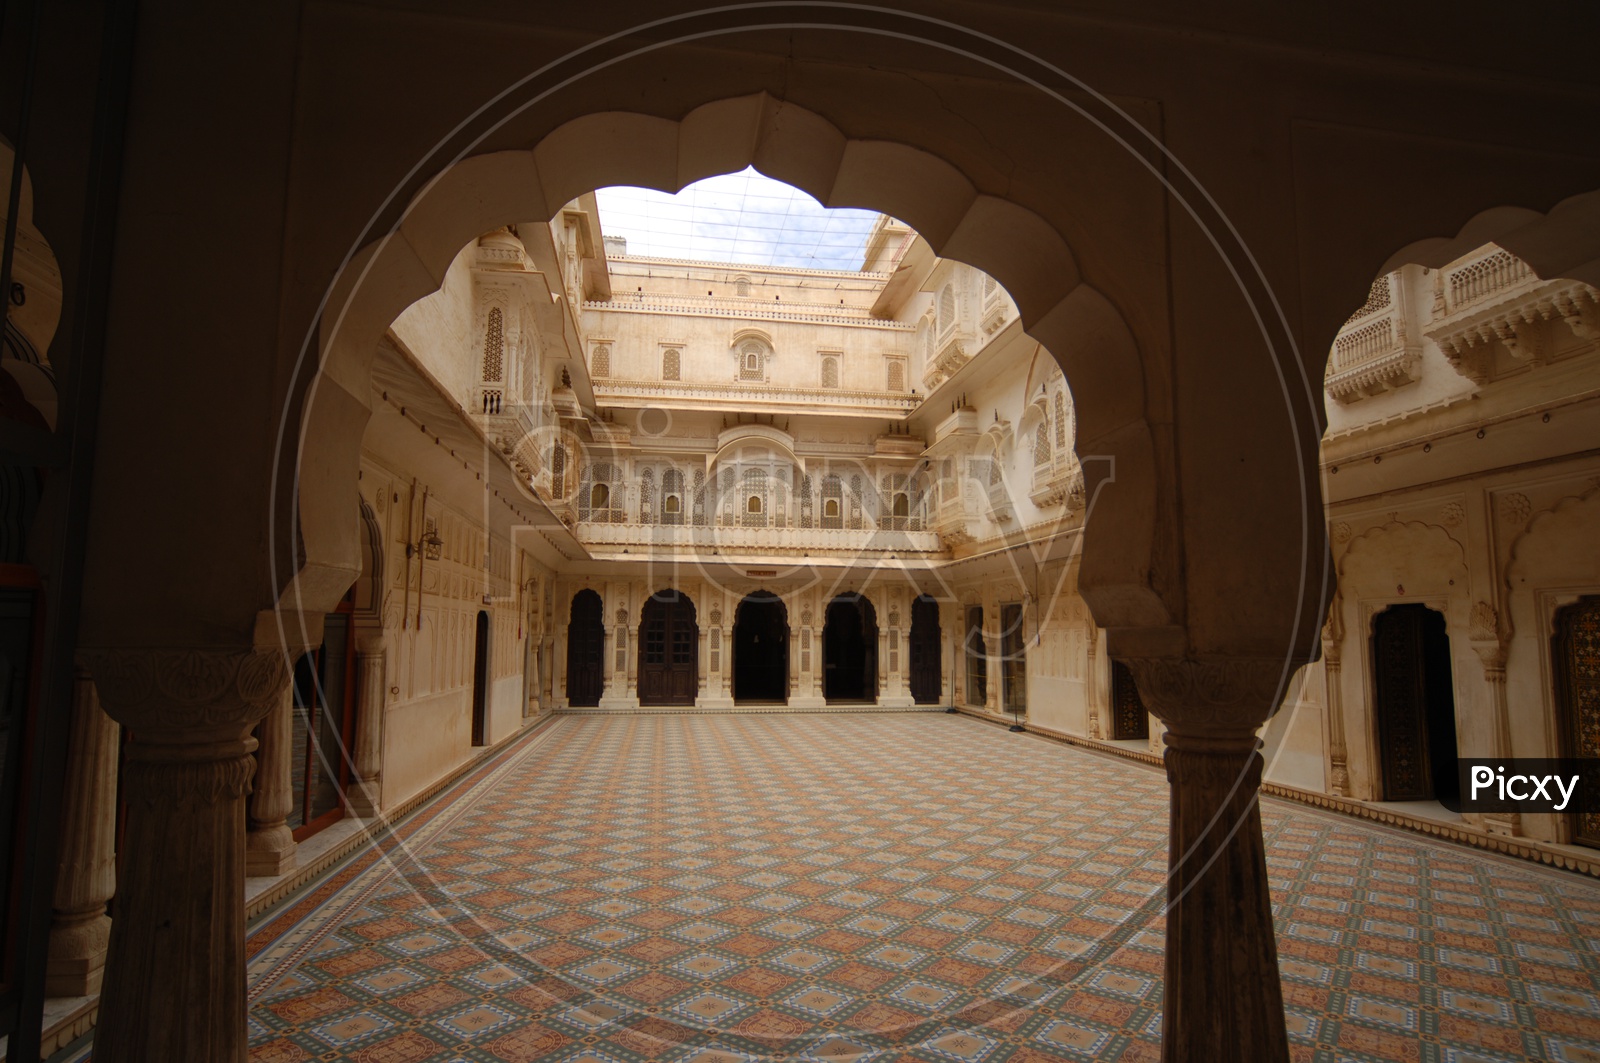 View of palace from inside